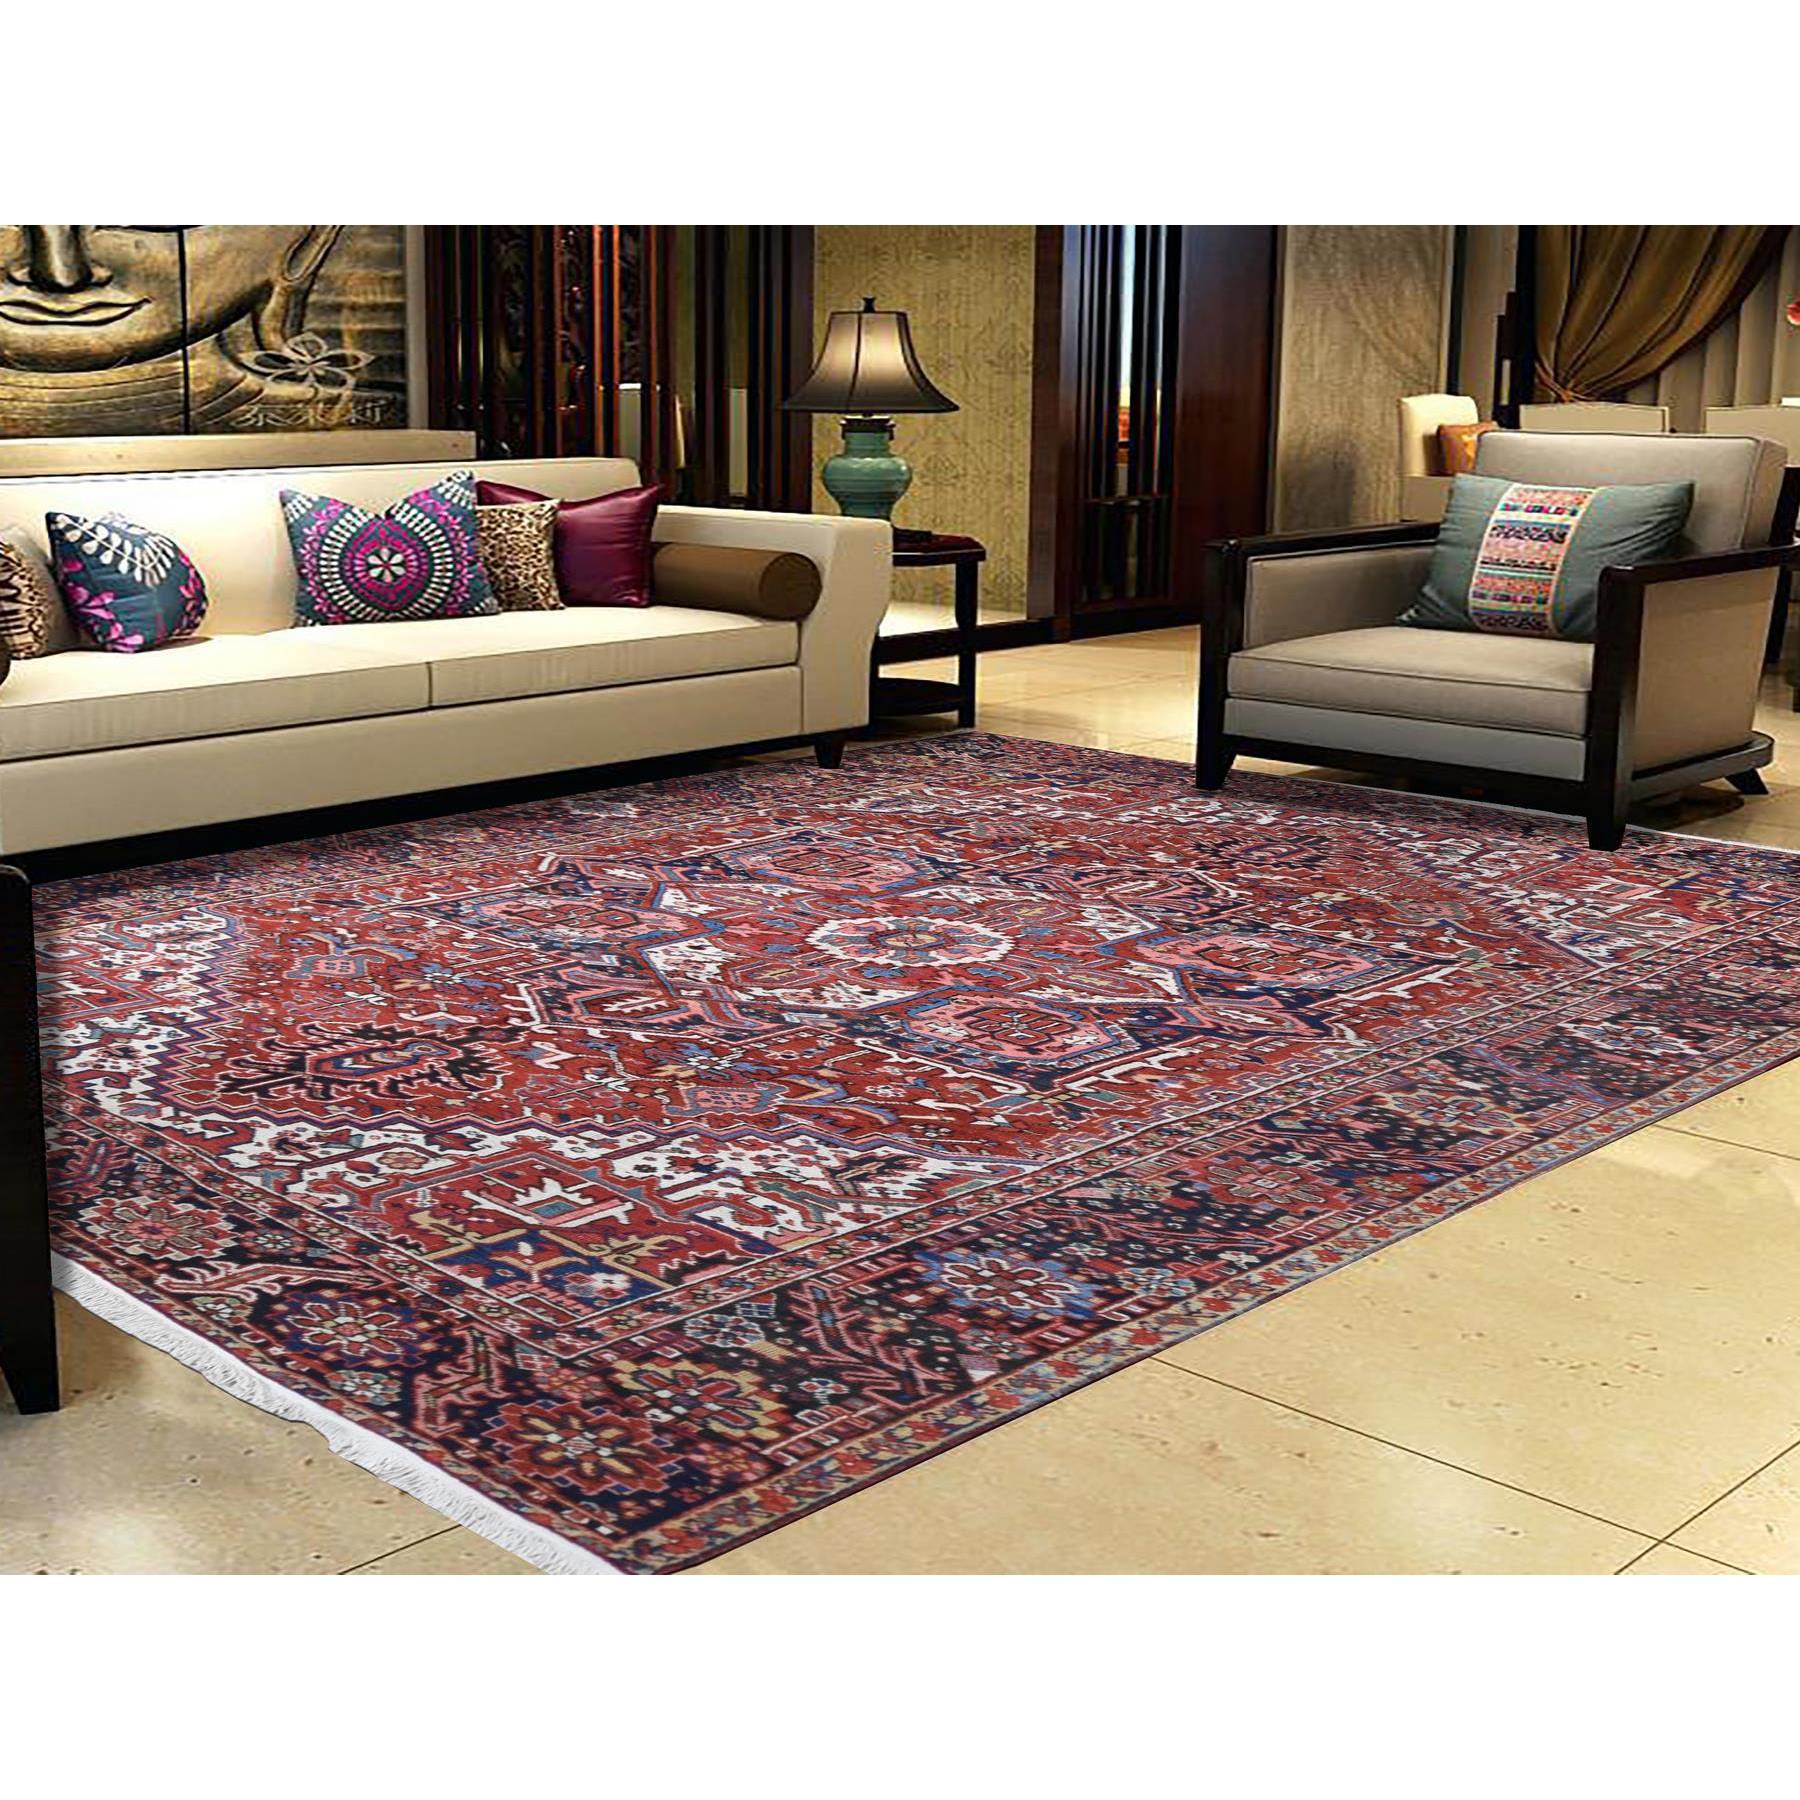 This fabulous Hand-Knotted carpet has been created and designed for extra strength and durability. This rug has been handcrafted for weeks in the traditional method that is used to makeExact Rug Size in Feet and Inches : 8'10